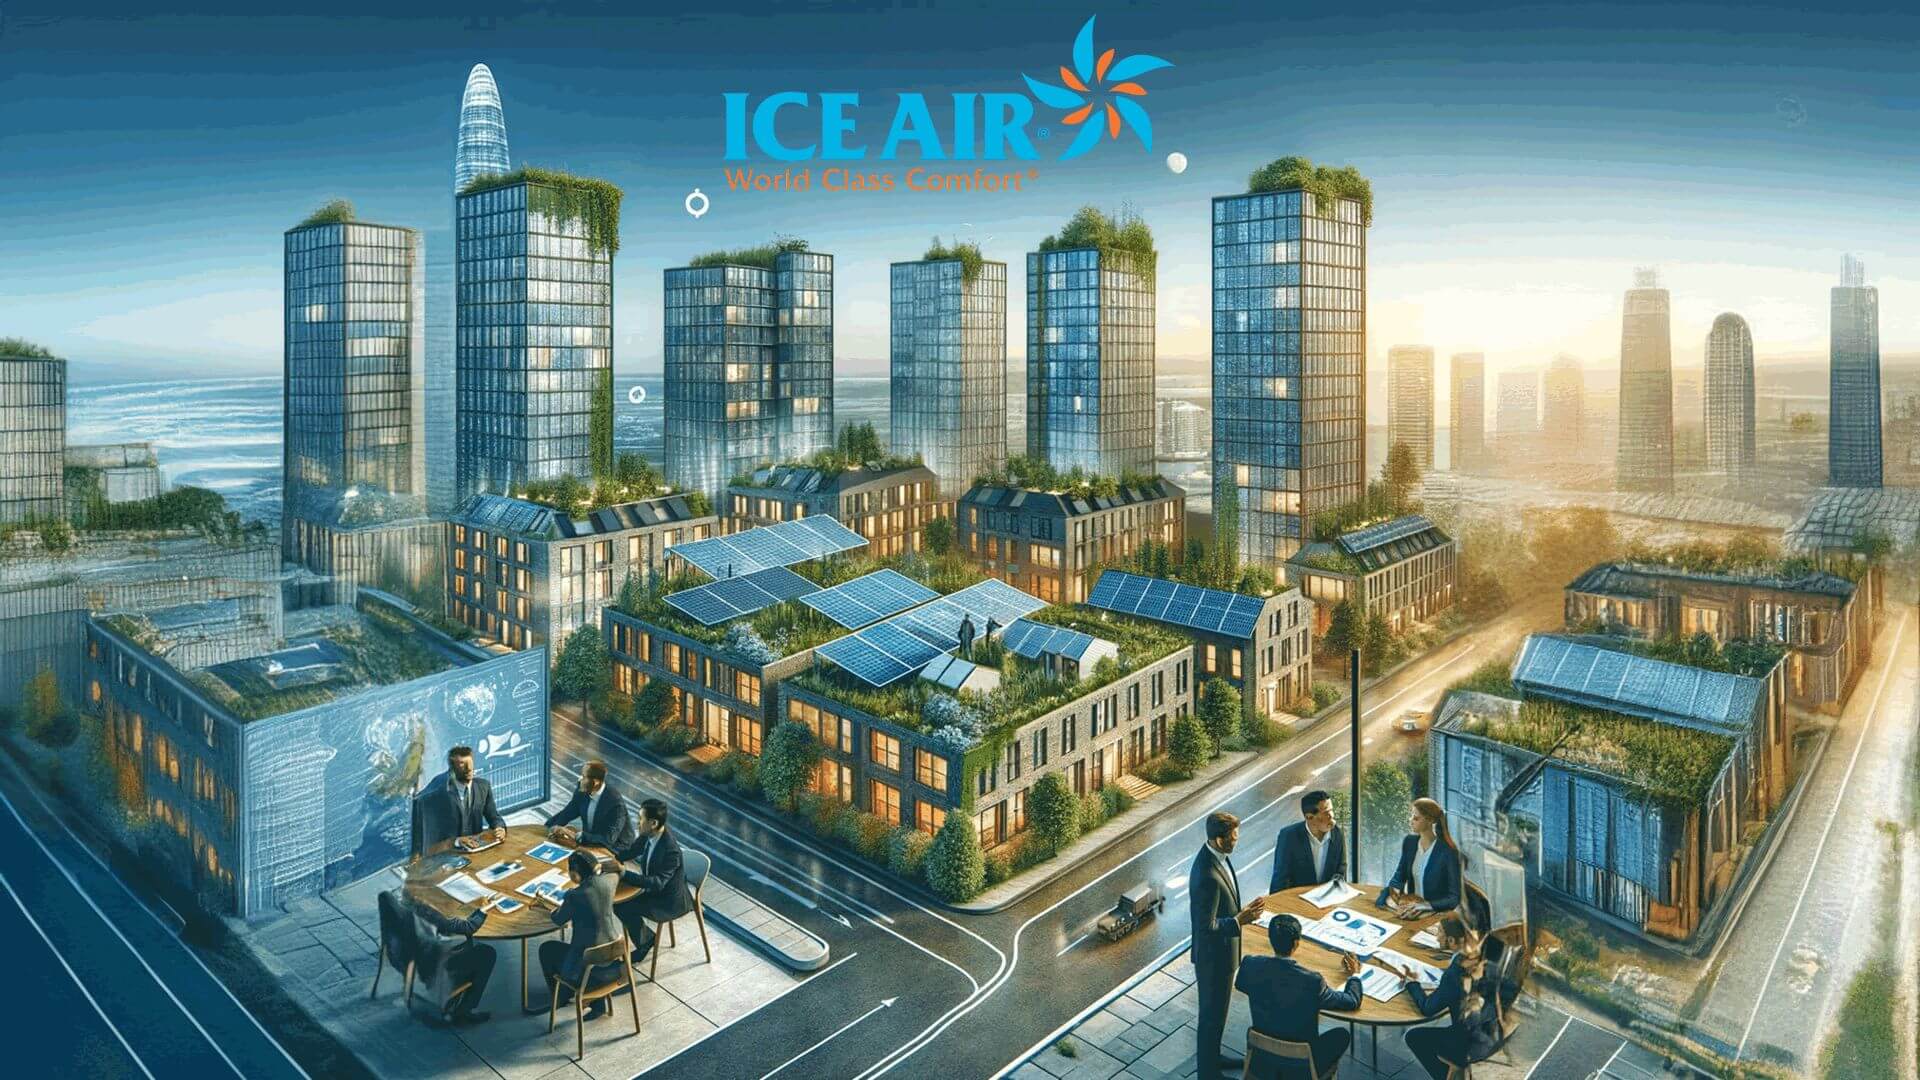 Ice Air News Refrigeration Transition Strategy & Support